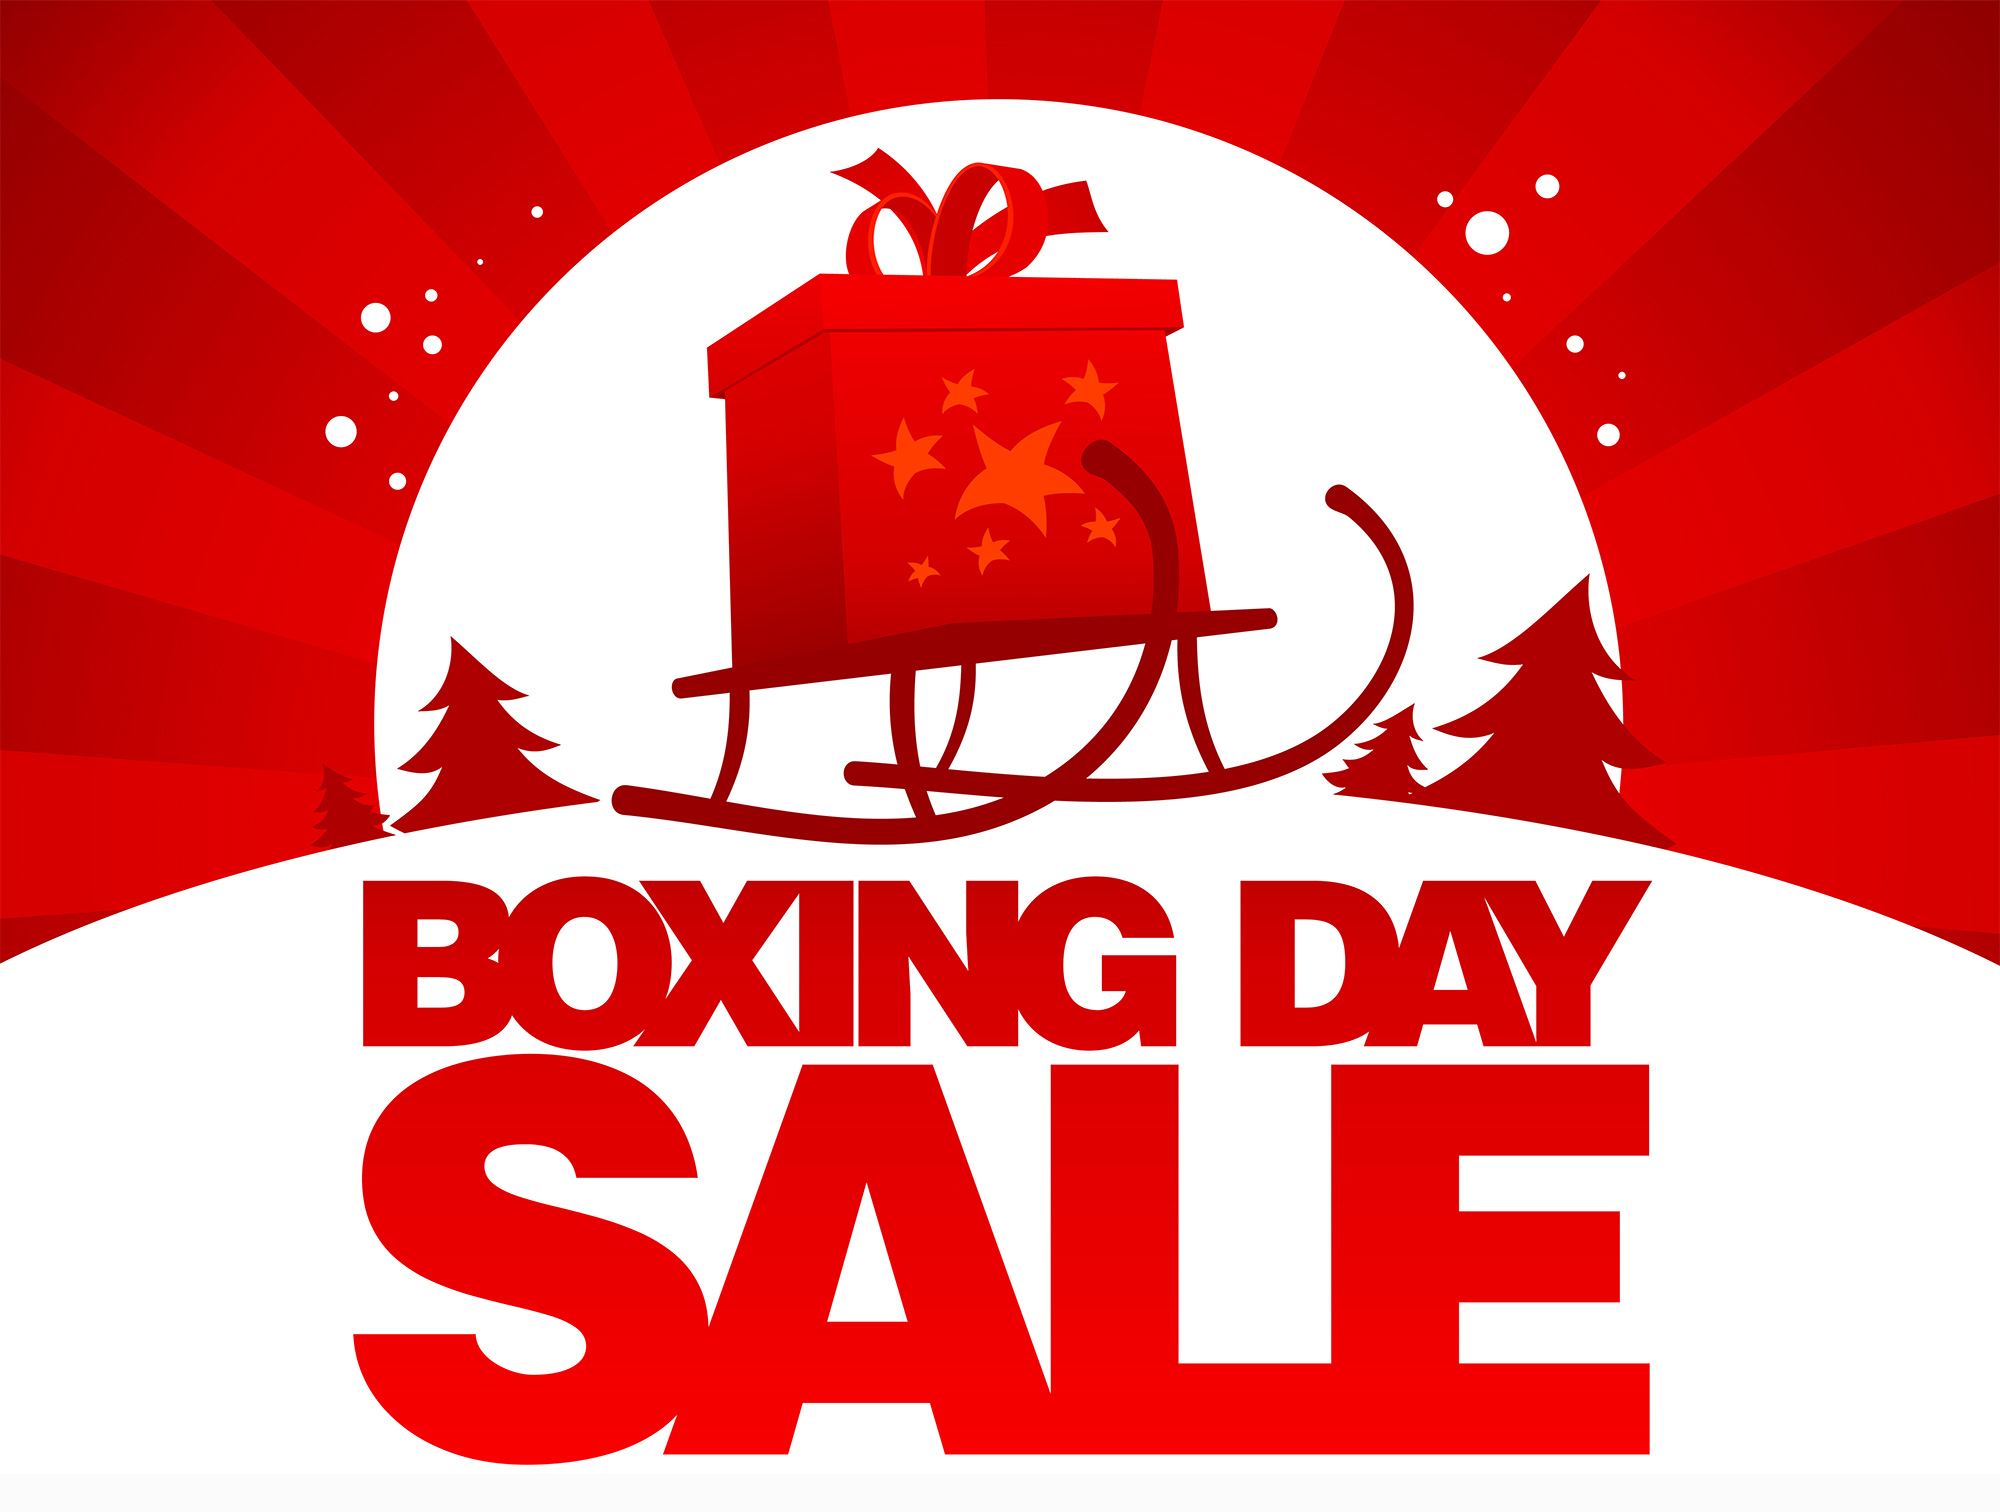 Boxing Day 2018 Sale! Dec 26, 2018 ONLY